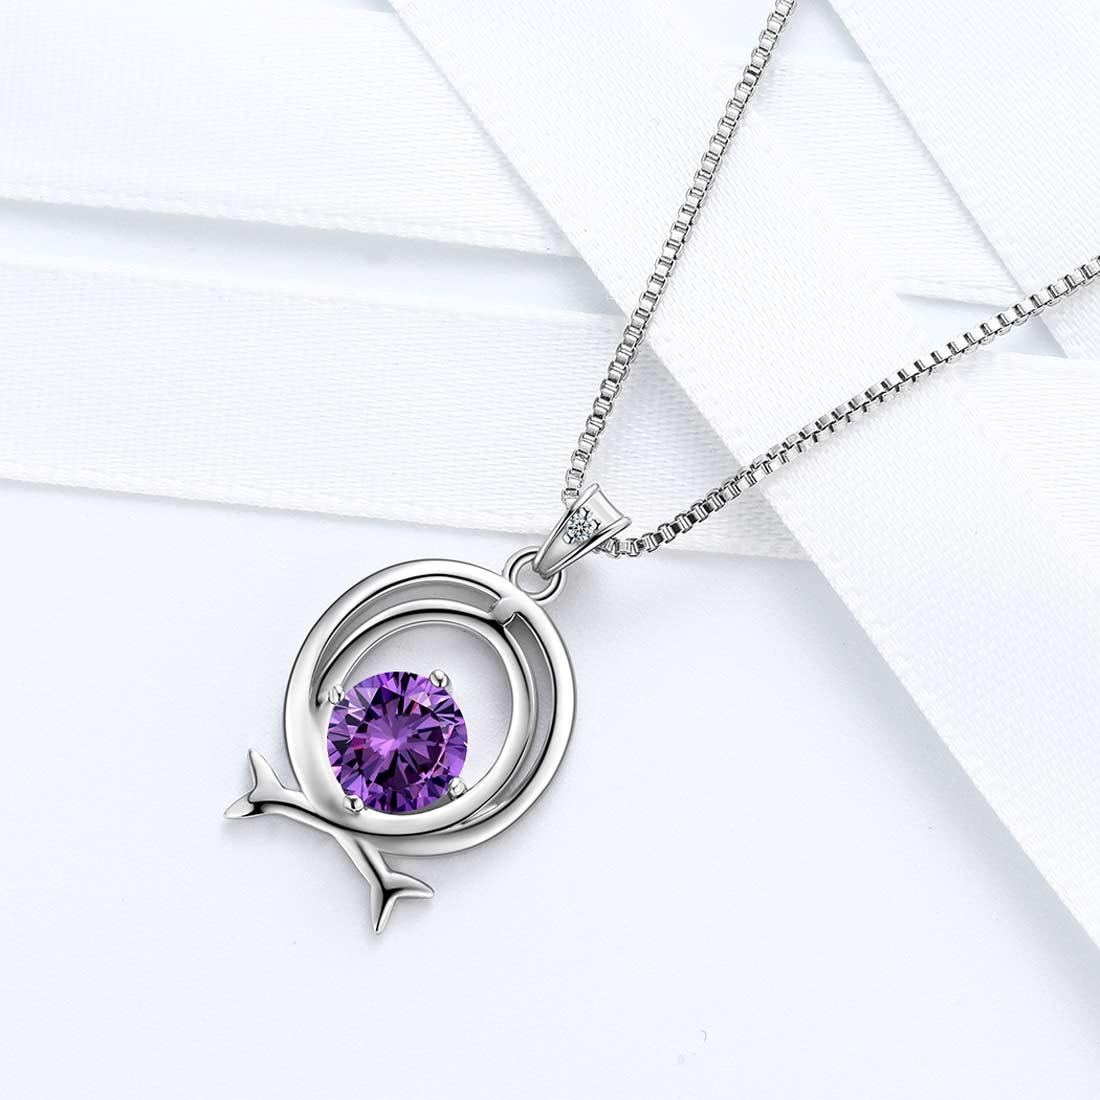 Zodiac Pisces Necklace February Birthstone Pendant Crystal - Necklaces - Aurora Tears